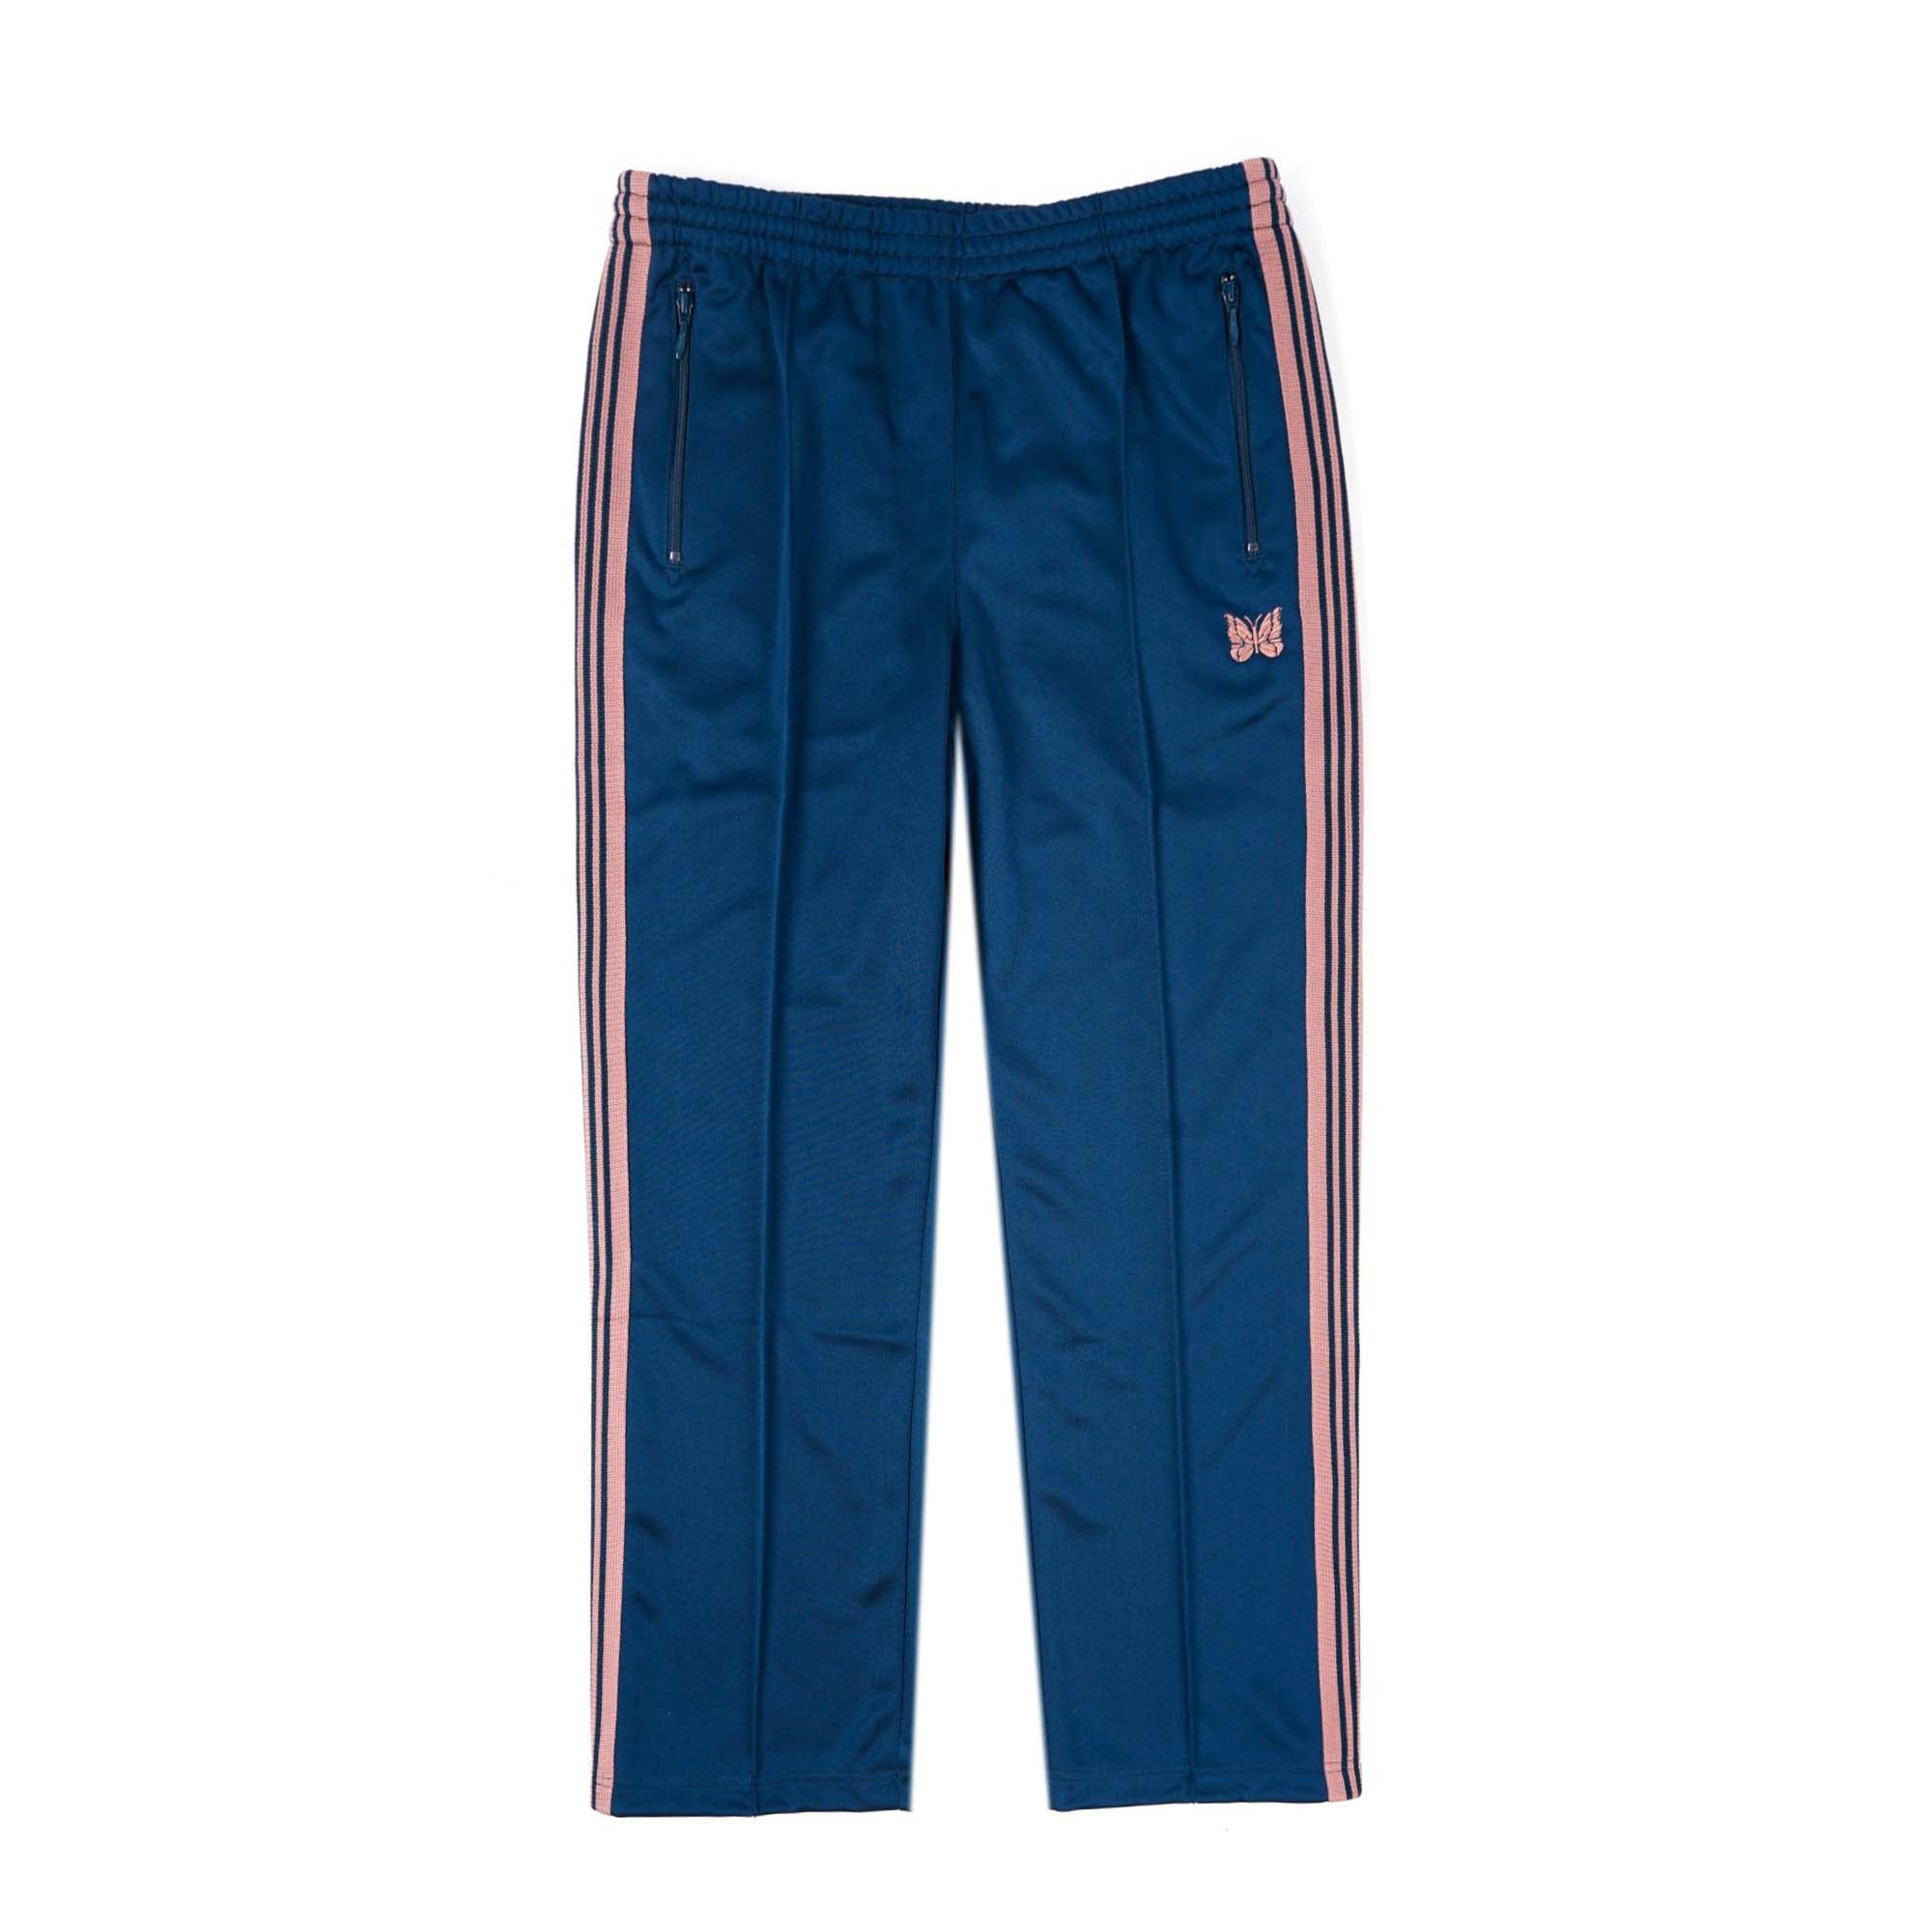 Needles Narrow 'Teal' Track Pants – Extra Butter